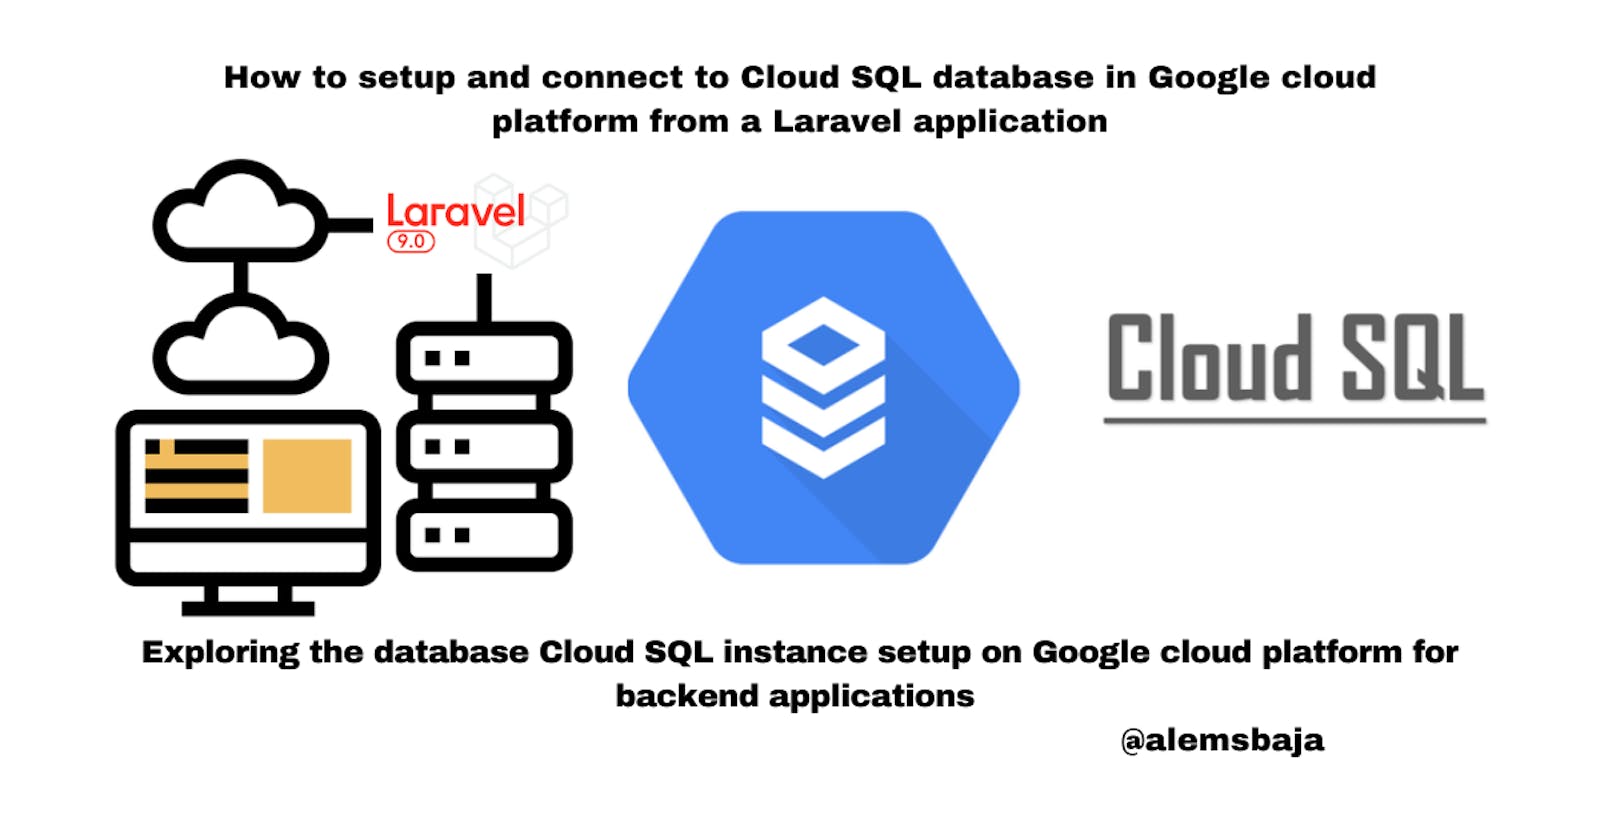 How to setup and connect to Cloud SQL database in Google cloud platform from a Laravel application